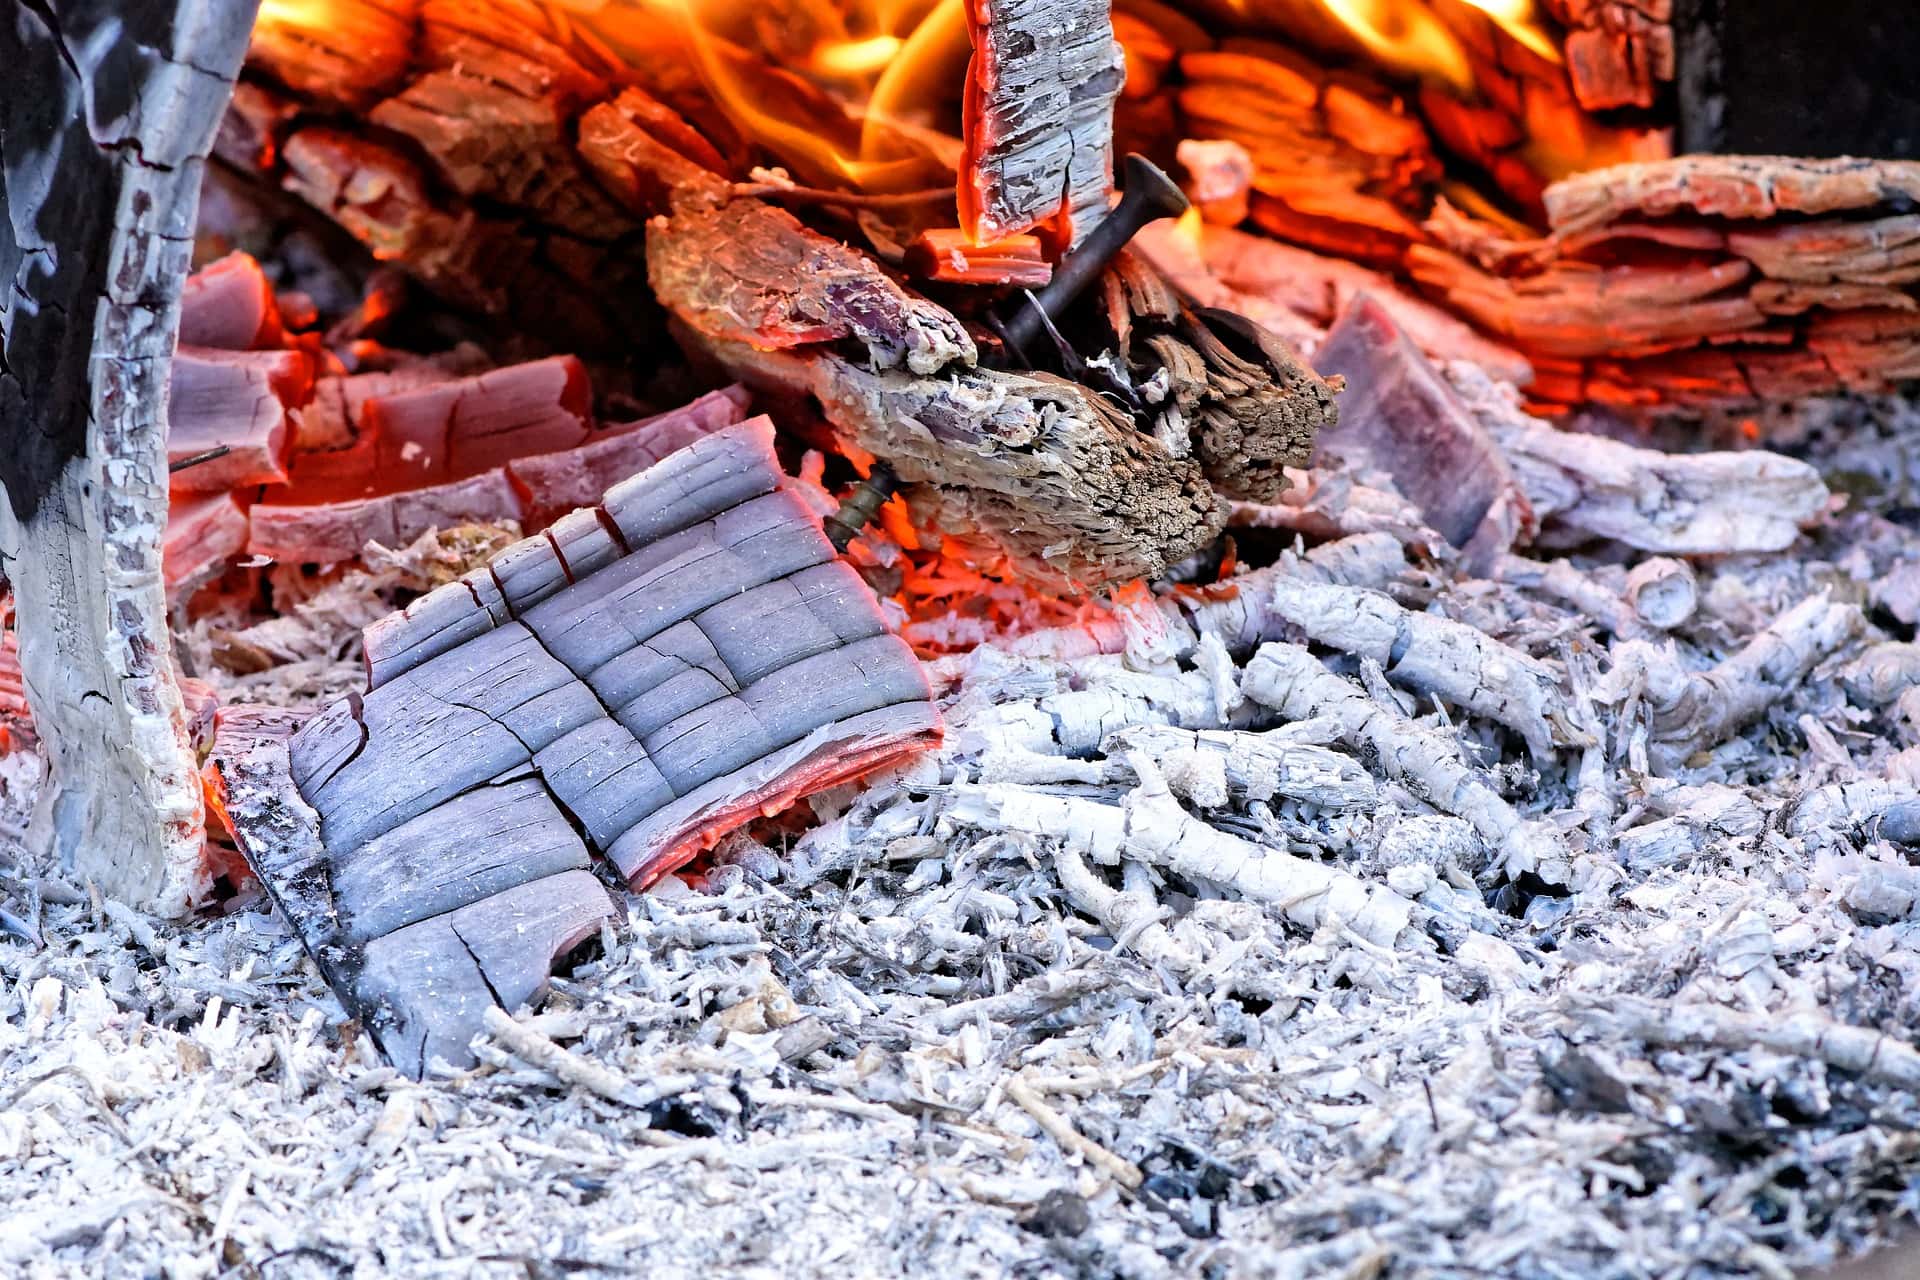 Benefits and Uses of Wood Ash